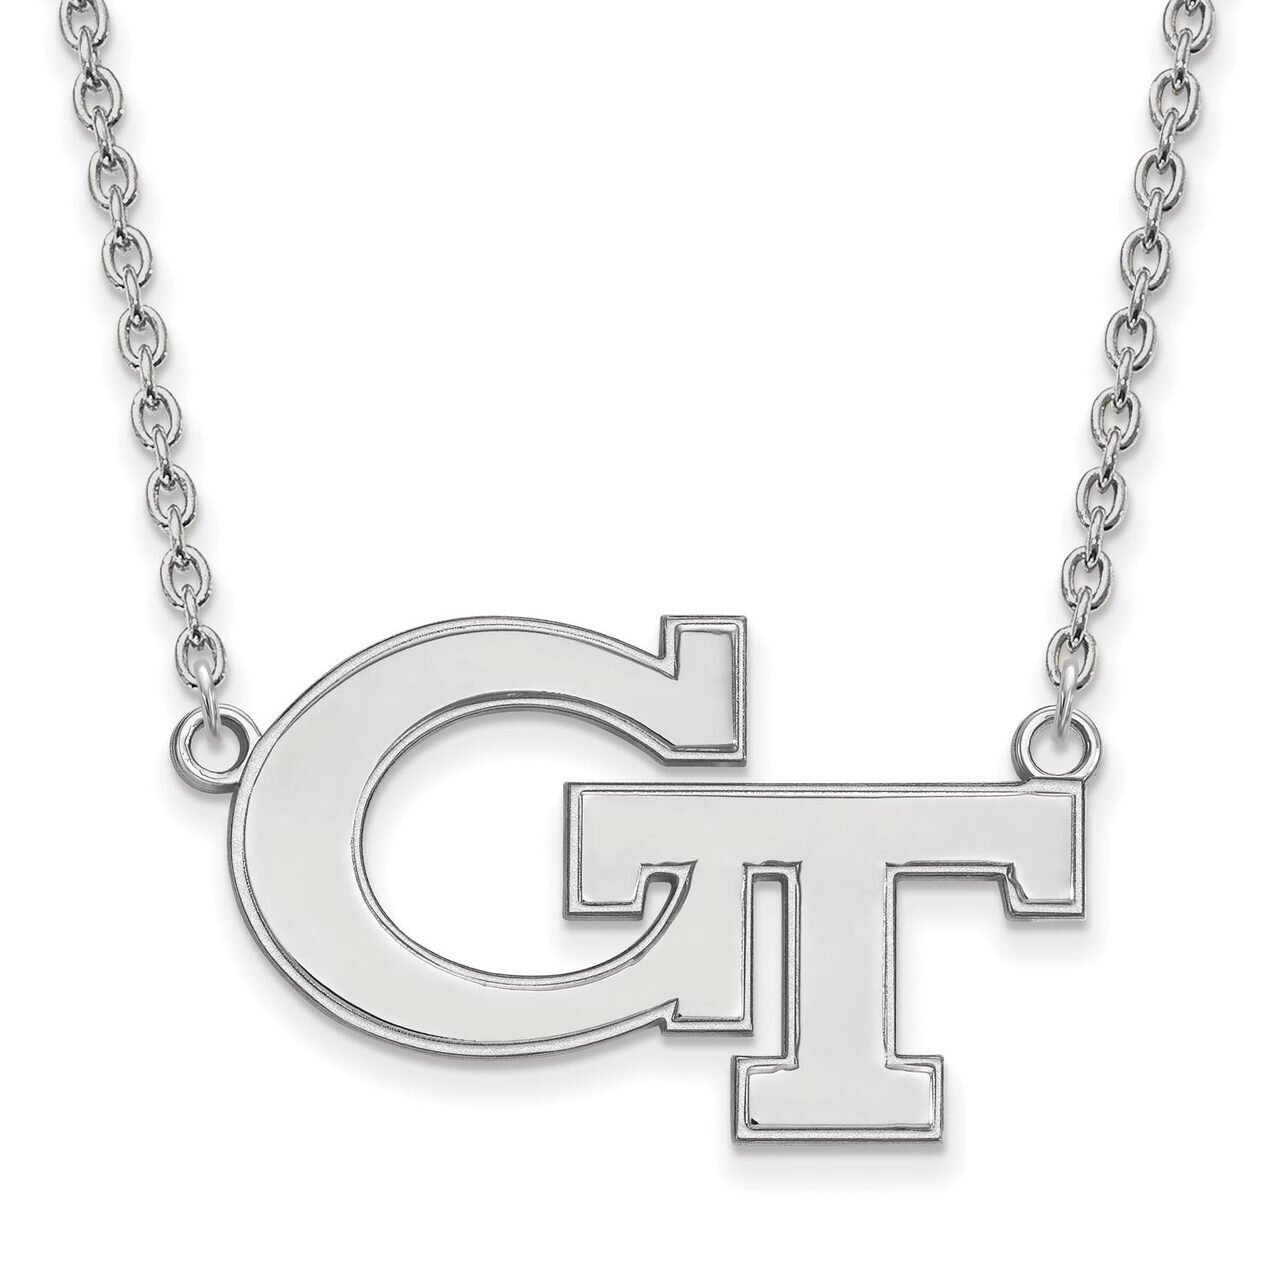 Georgia Institute of Technology Large Pendant with Chain Necklace 14k White Gold 4W010GT-18